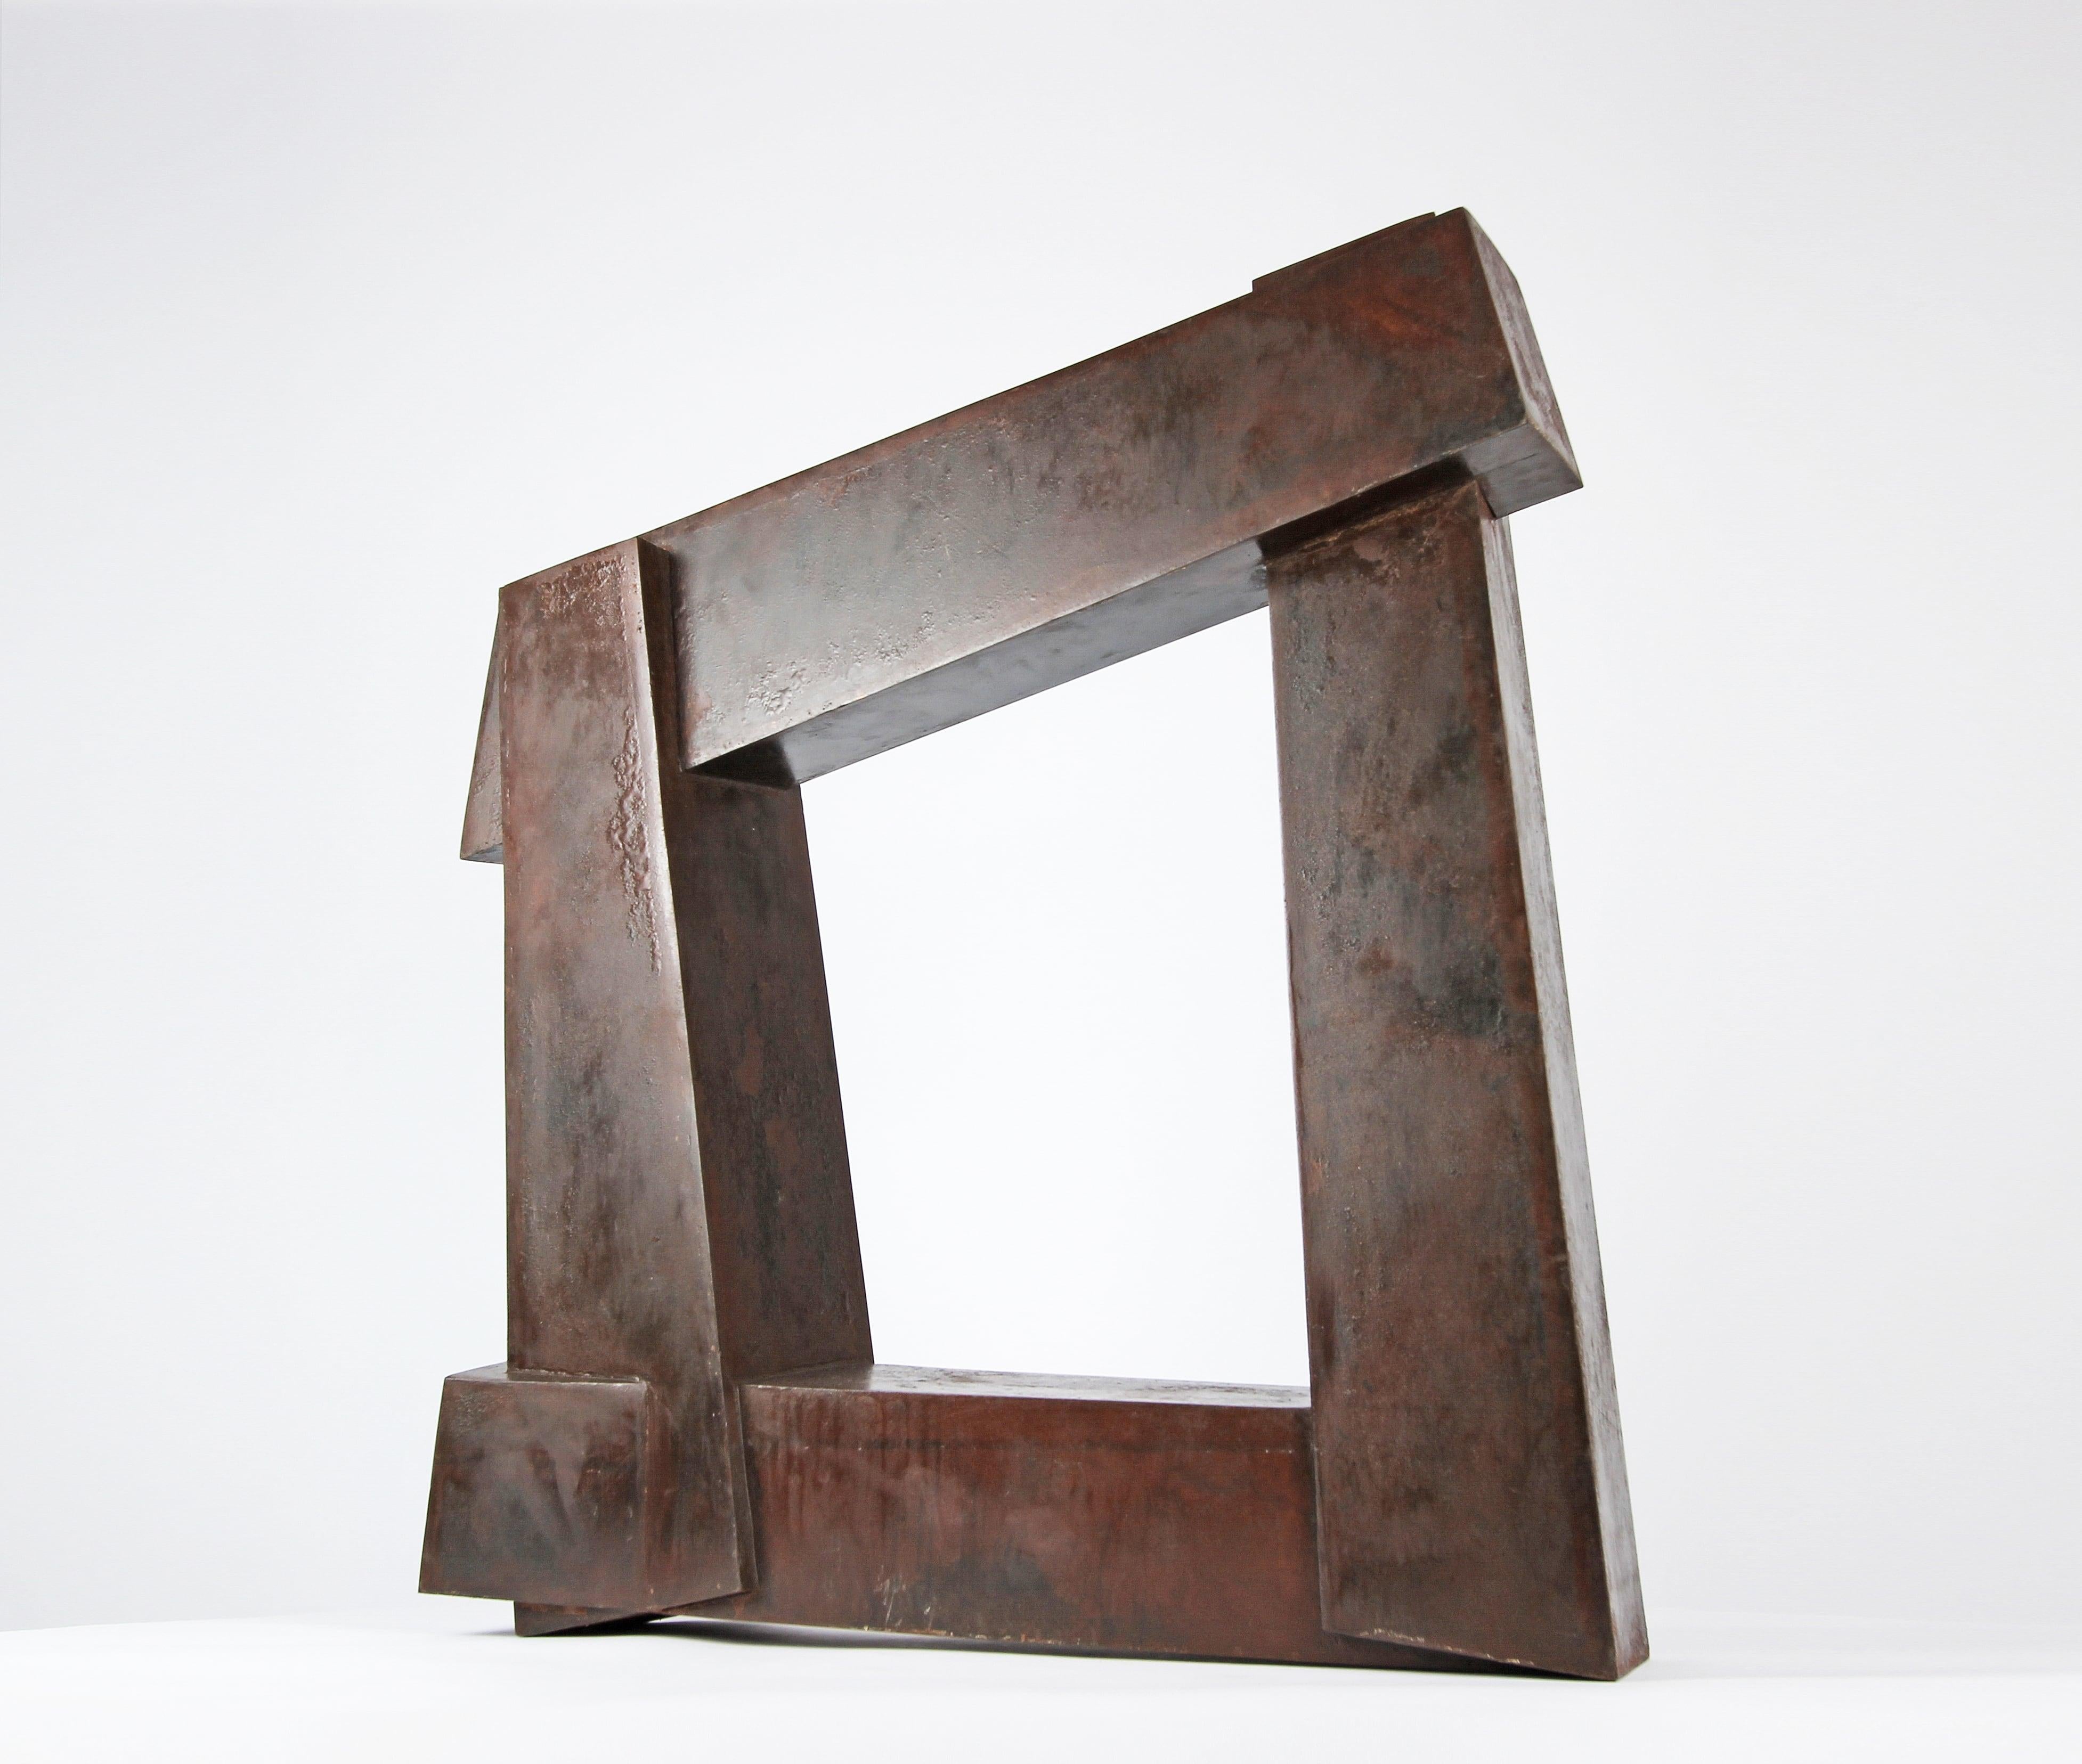 Arch II is a one-off steel sculpture by French contemporary artist Delphine Brabant from the series "Variation".
In this series the artist produces a succession of variations around a simple form, an arch, experimenting with the different ways of